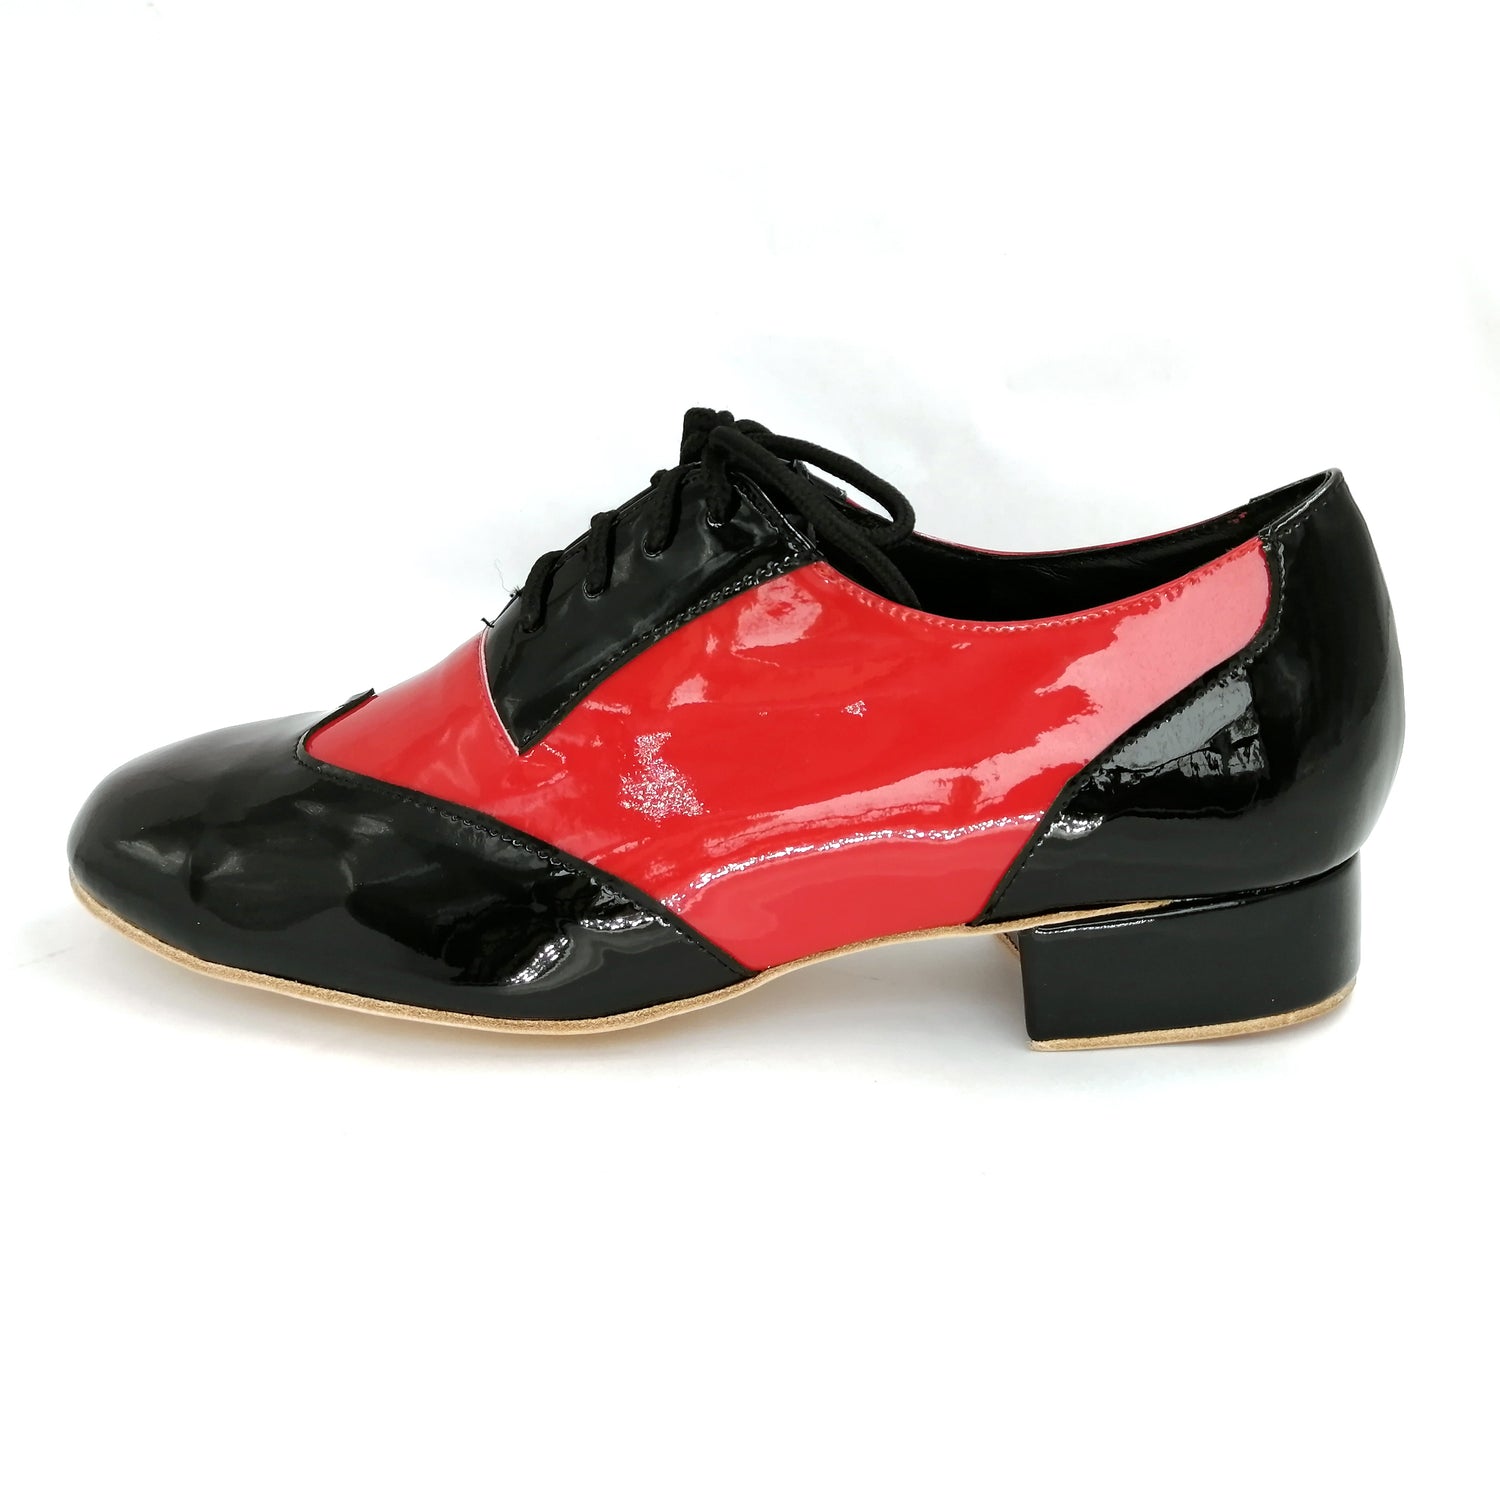 Pro Dancer Men's Tango Shoes with 1 inch Heel Leather Lace-up in Red and Black5